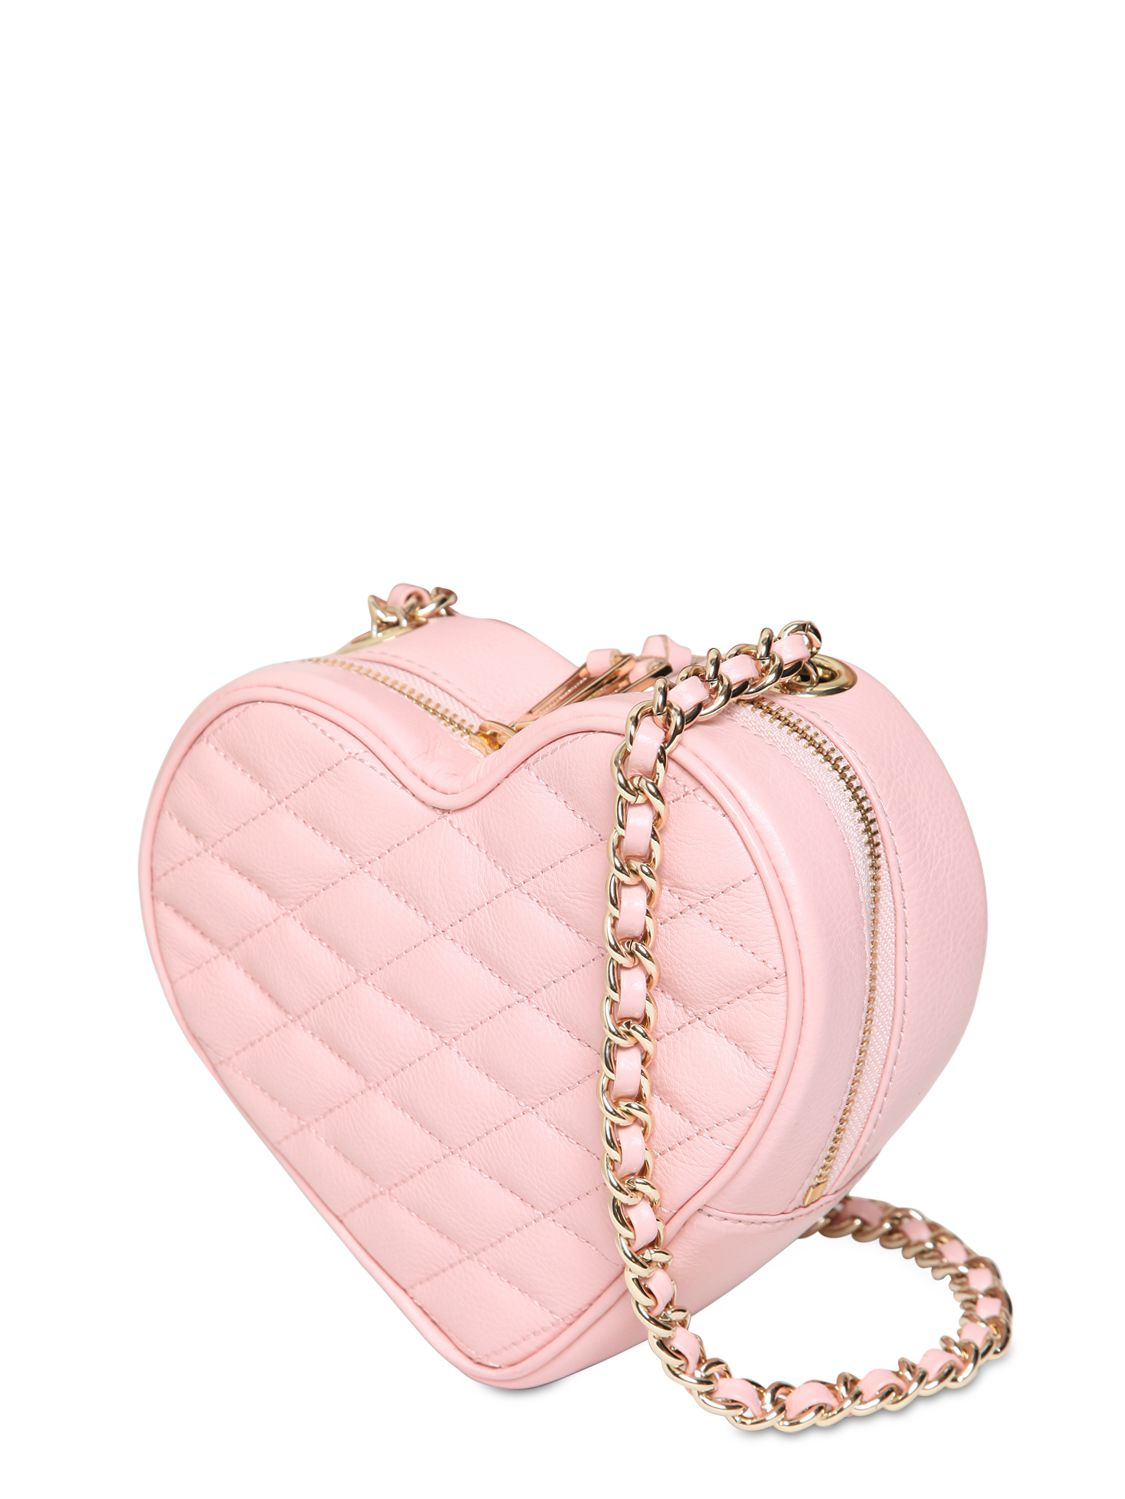 Rebecca Minkoff Heart Quilted Leather Shoulder Bag in Light Pink (Pink) - Lyst